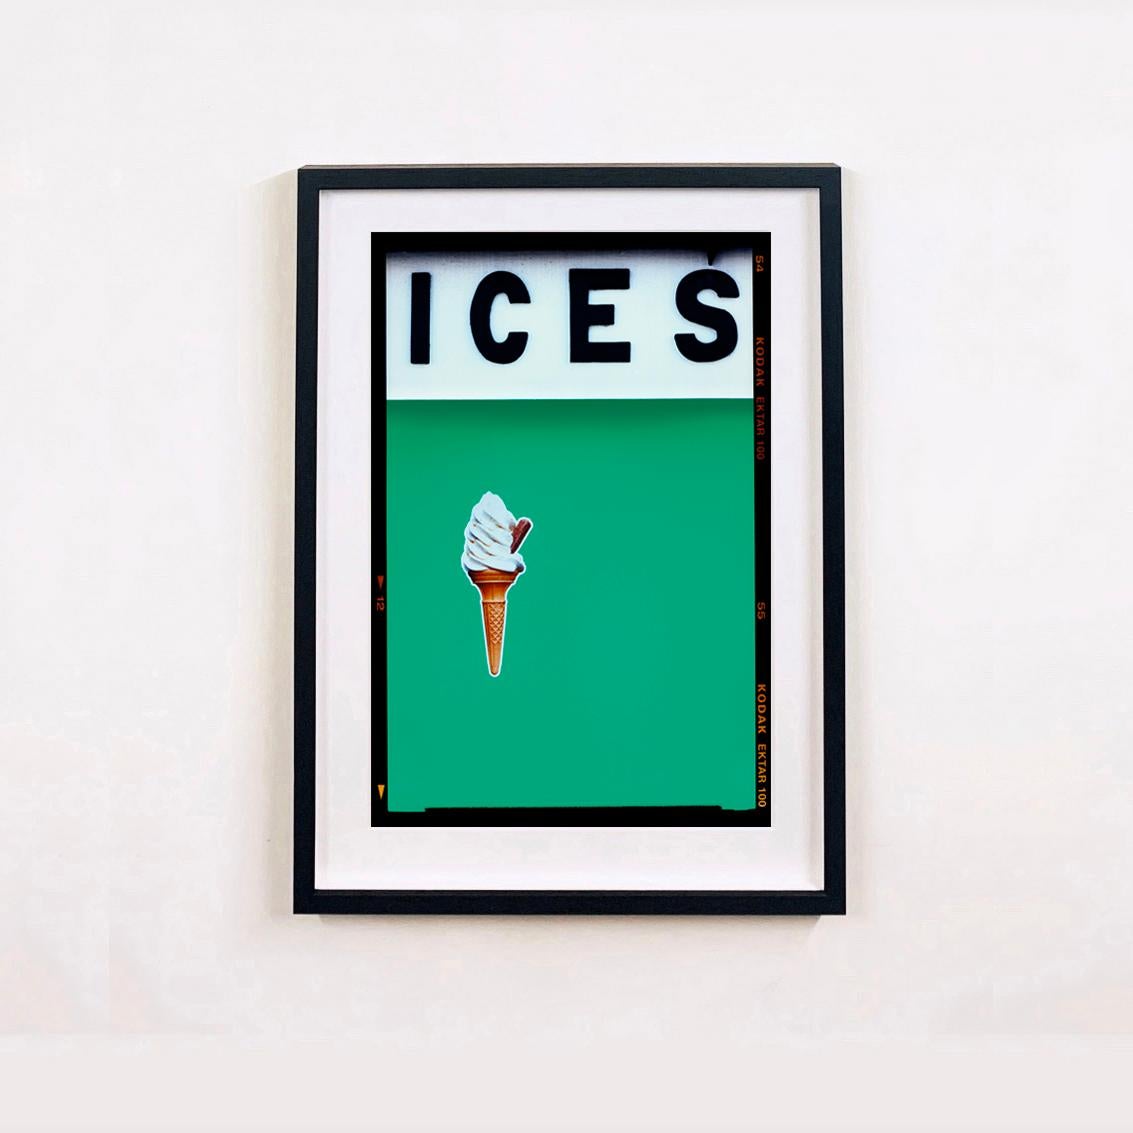 Ices (Viridian Green), Bexhill-on-Sea - British seaside color photography - Print by Richard Heeps